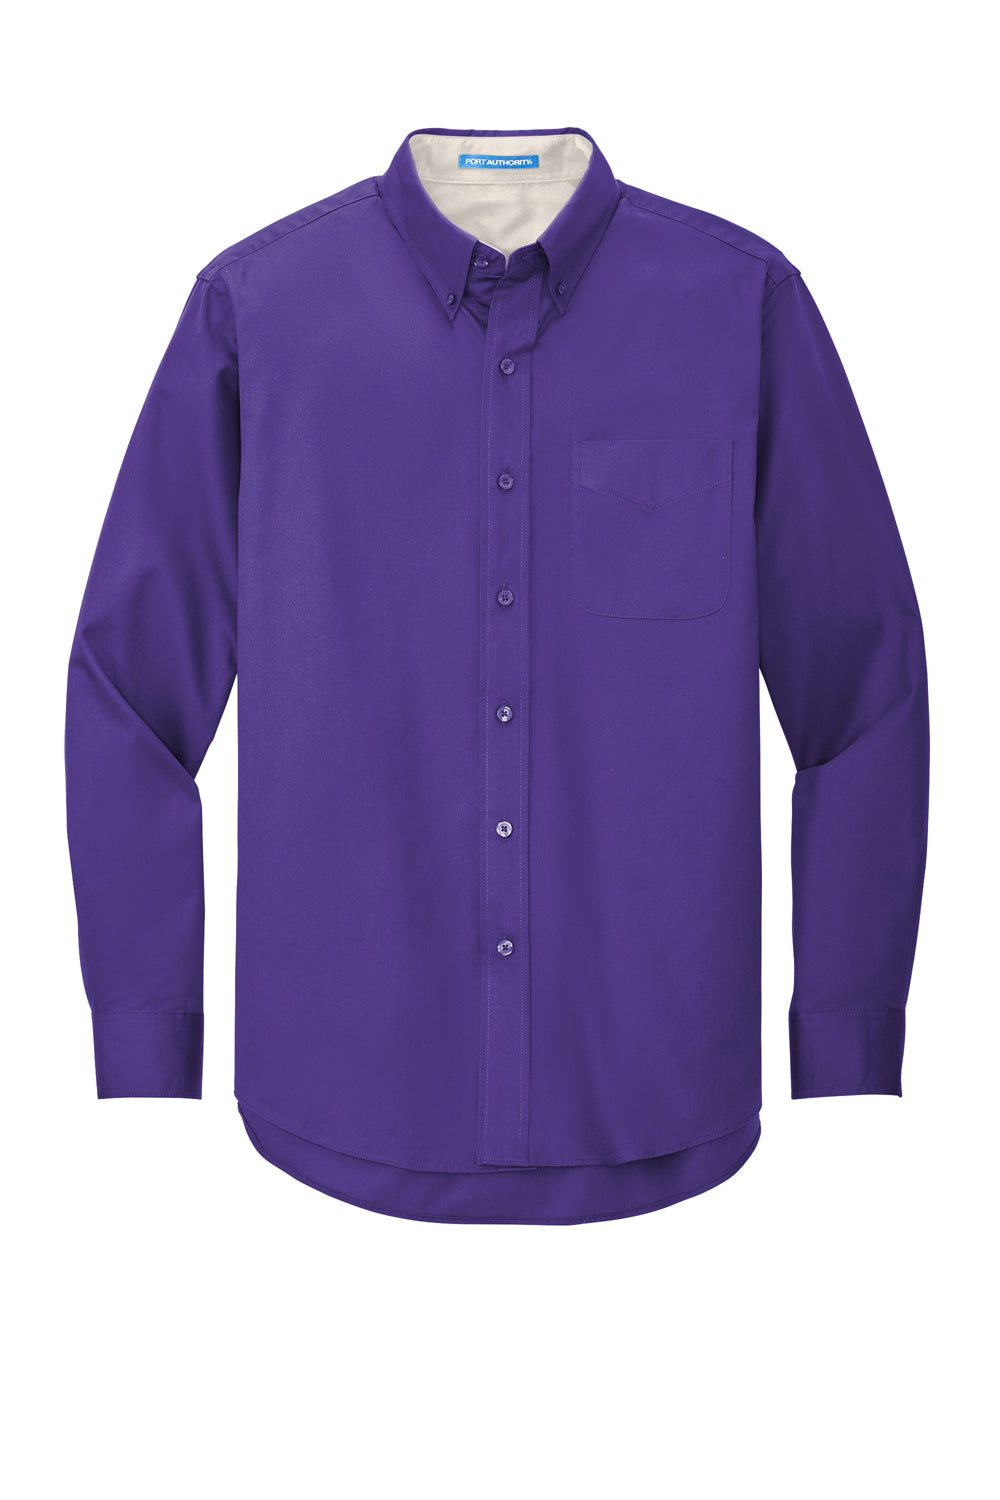 Port Authority S608/TLS608/S608ES Mens Easy Care Wrinkle Resistant Long Sleeve Button Down Shirt w/ Pocket Purple Flat Front